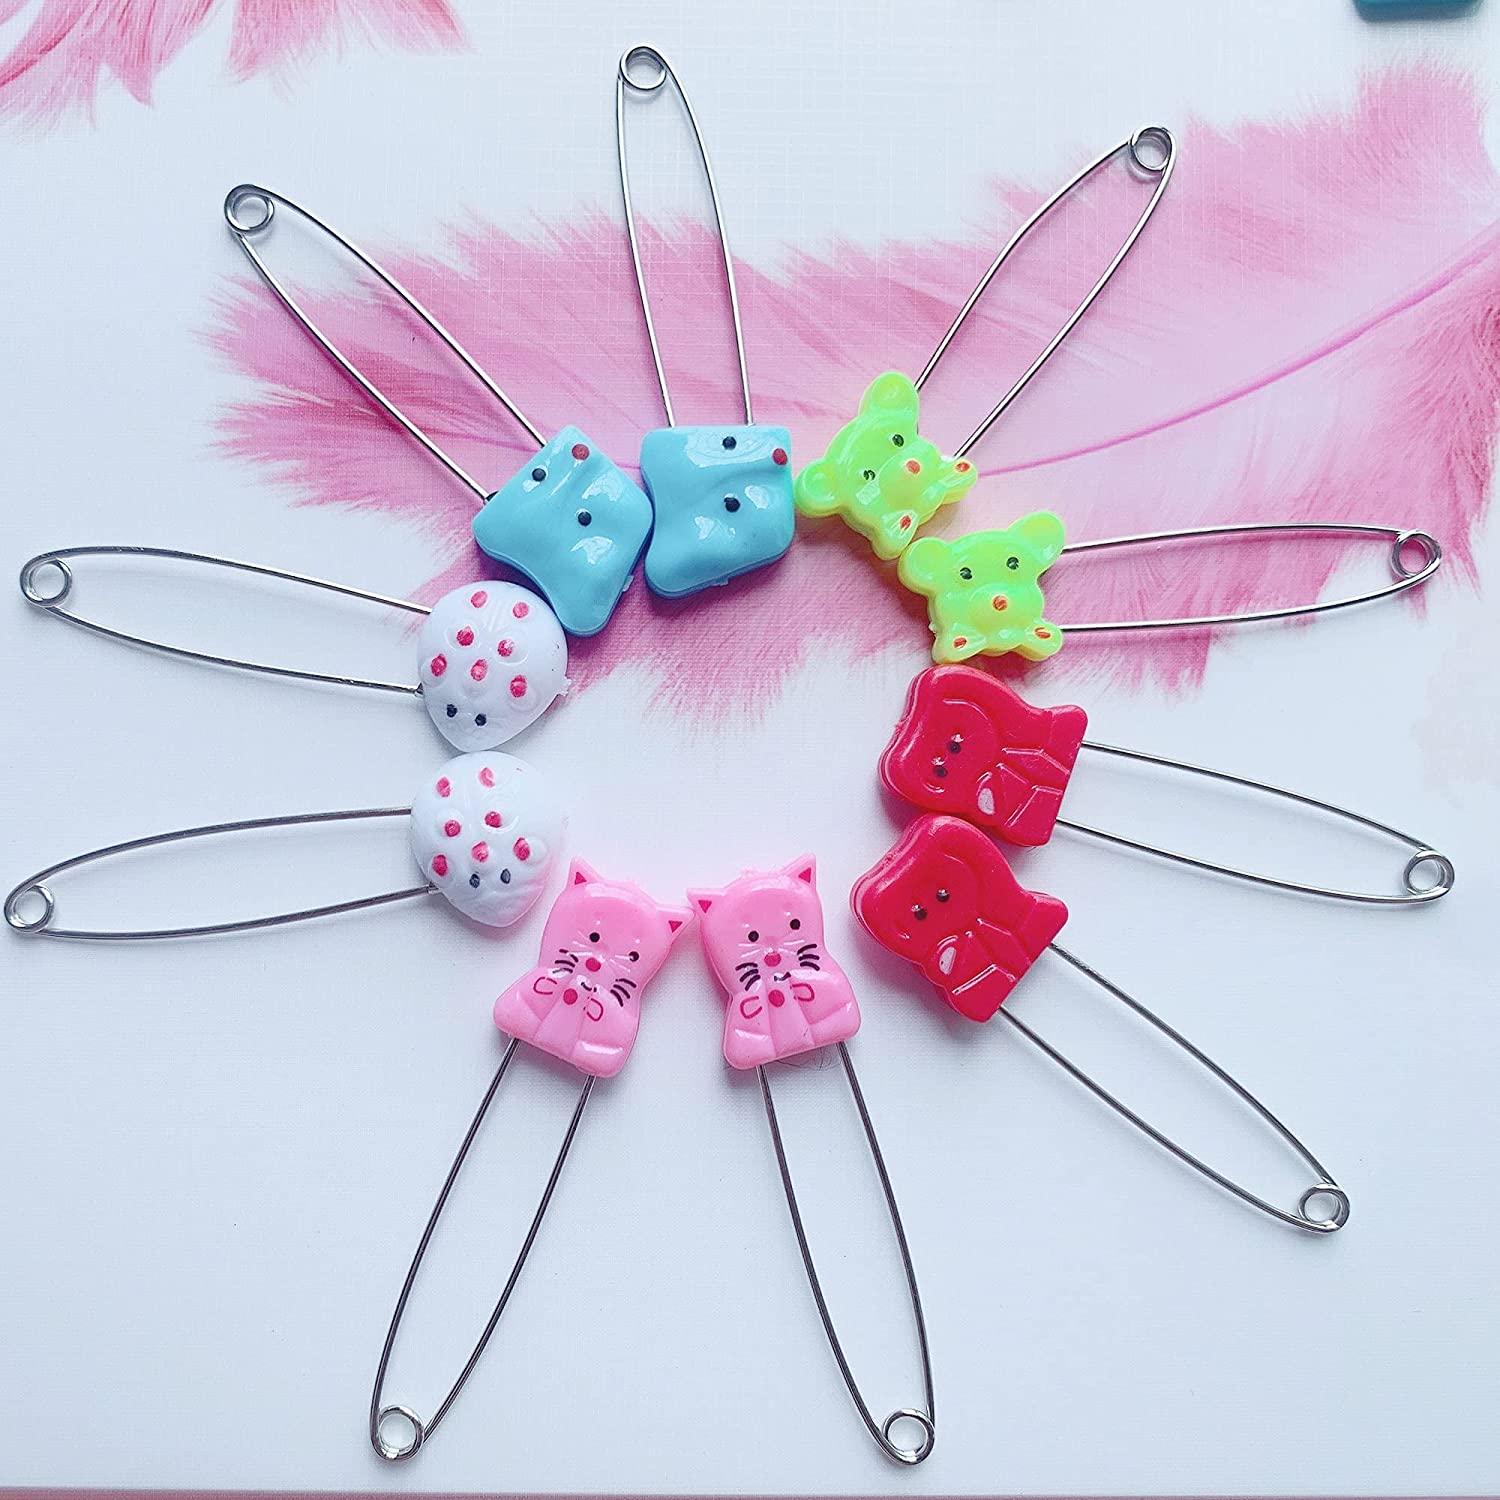 50 Pieces Diaper Pins Baby Safety Pins Head Cloth with Locking